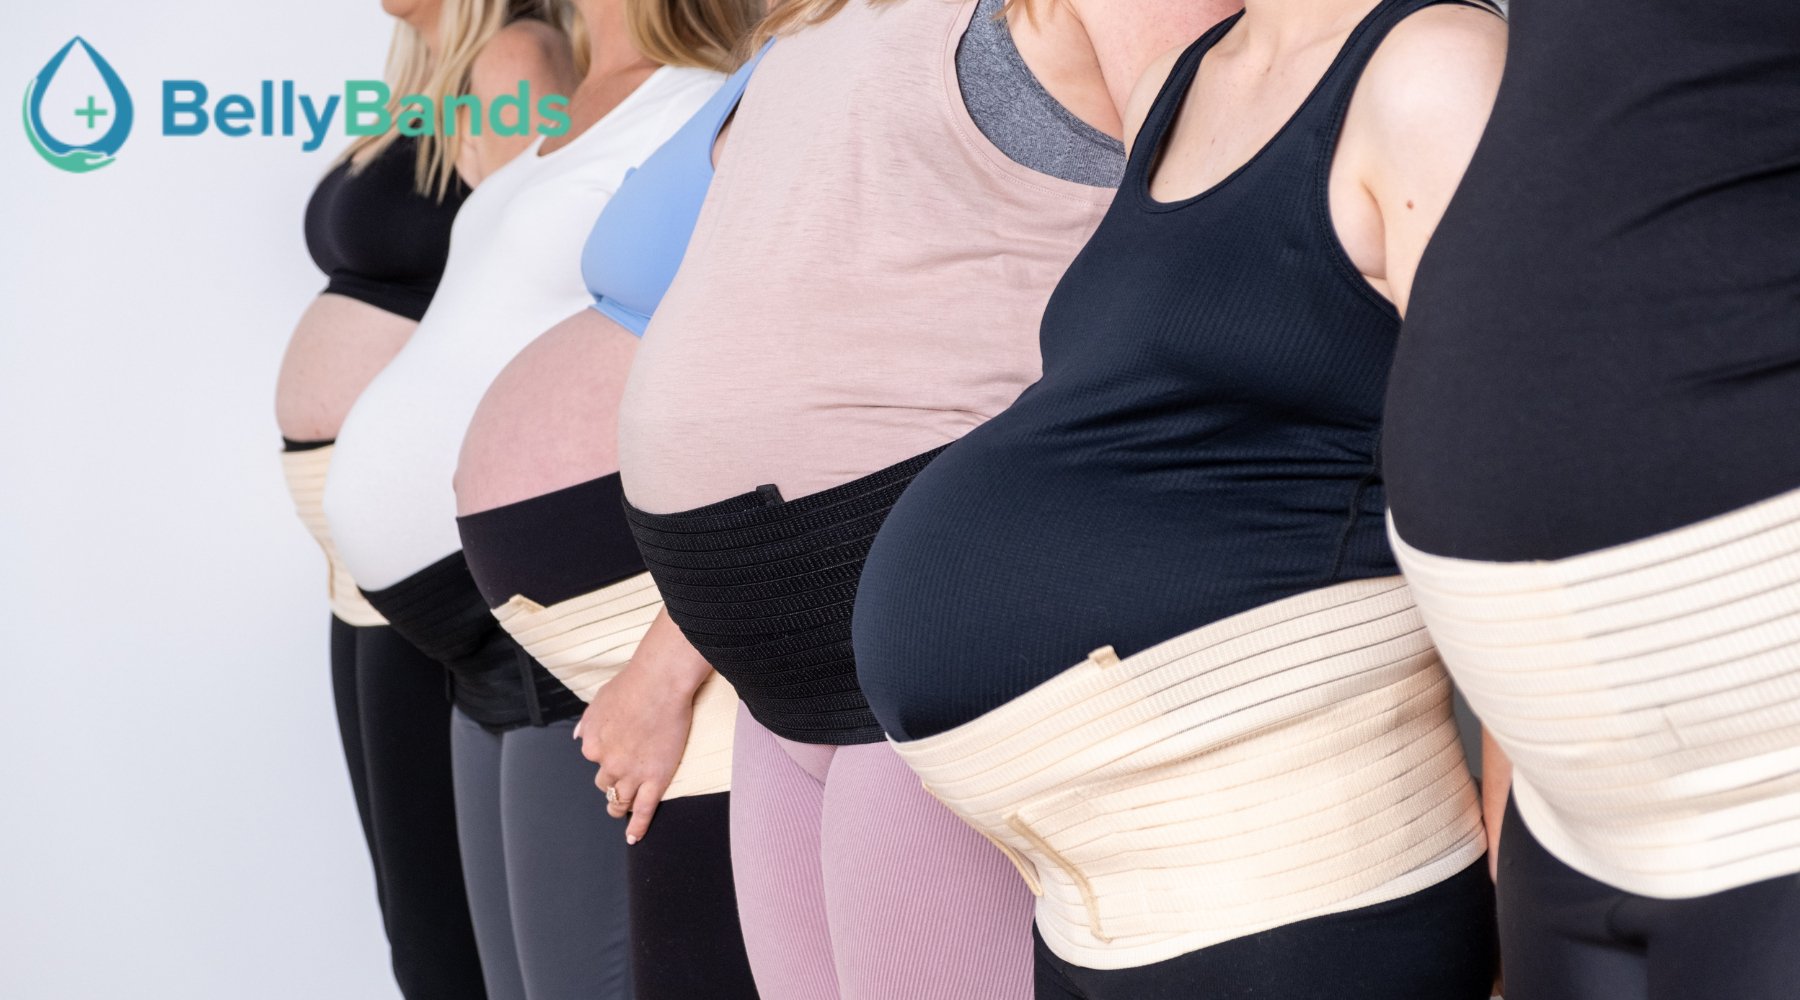 Are belly bands safe to wear during pregnancy? - Belly Bands